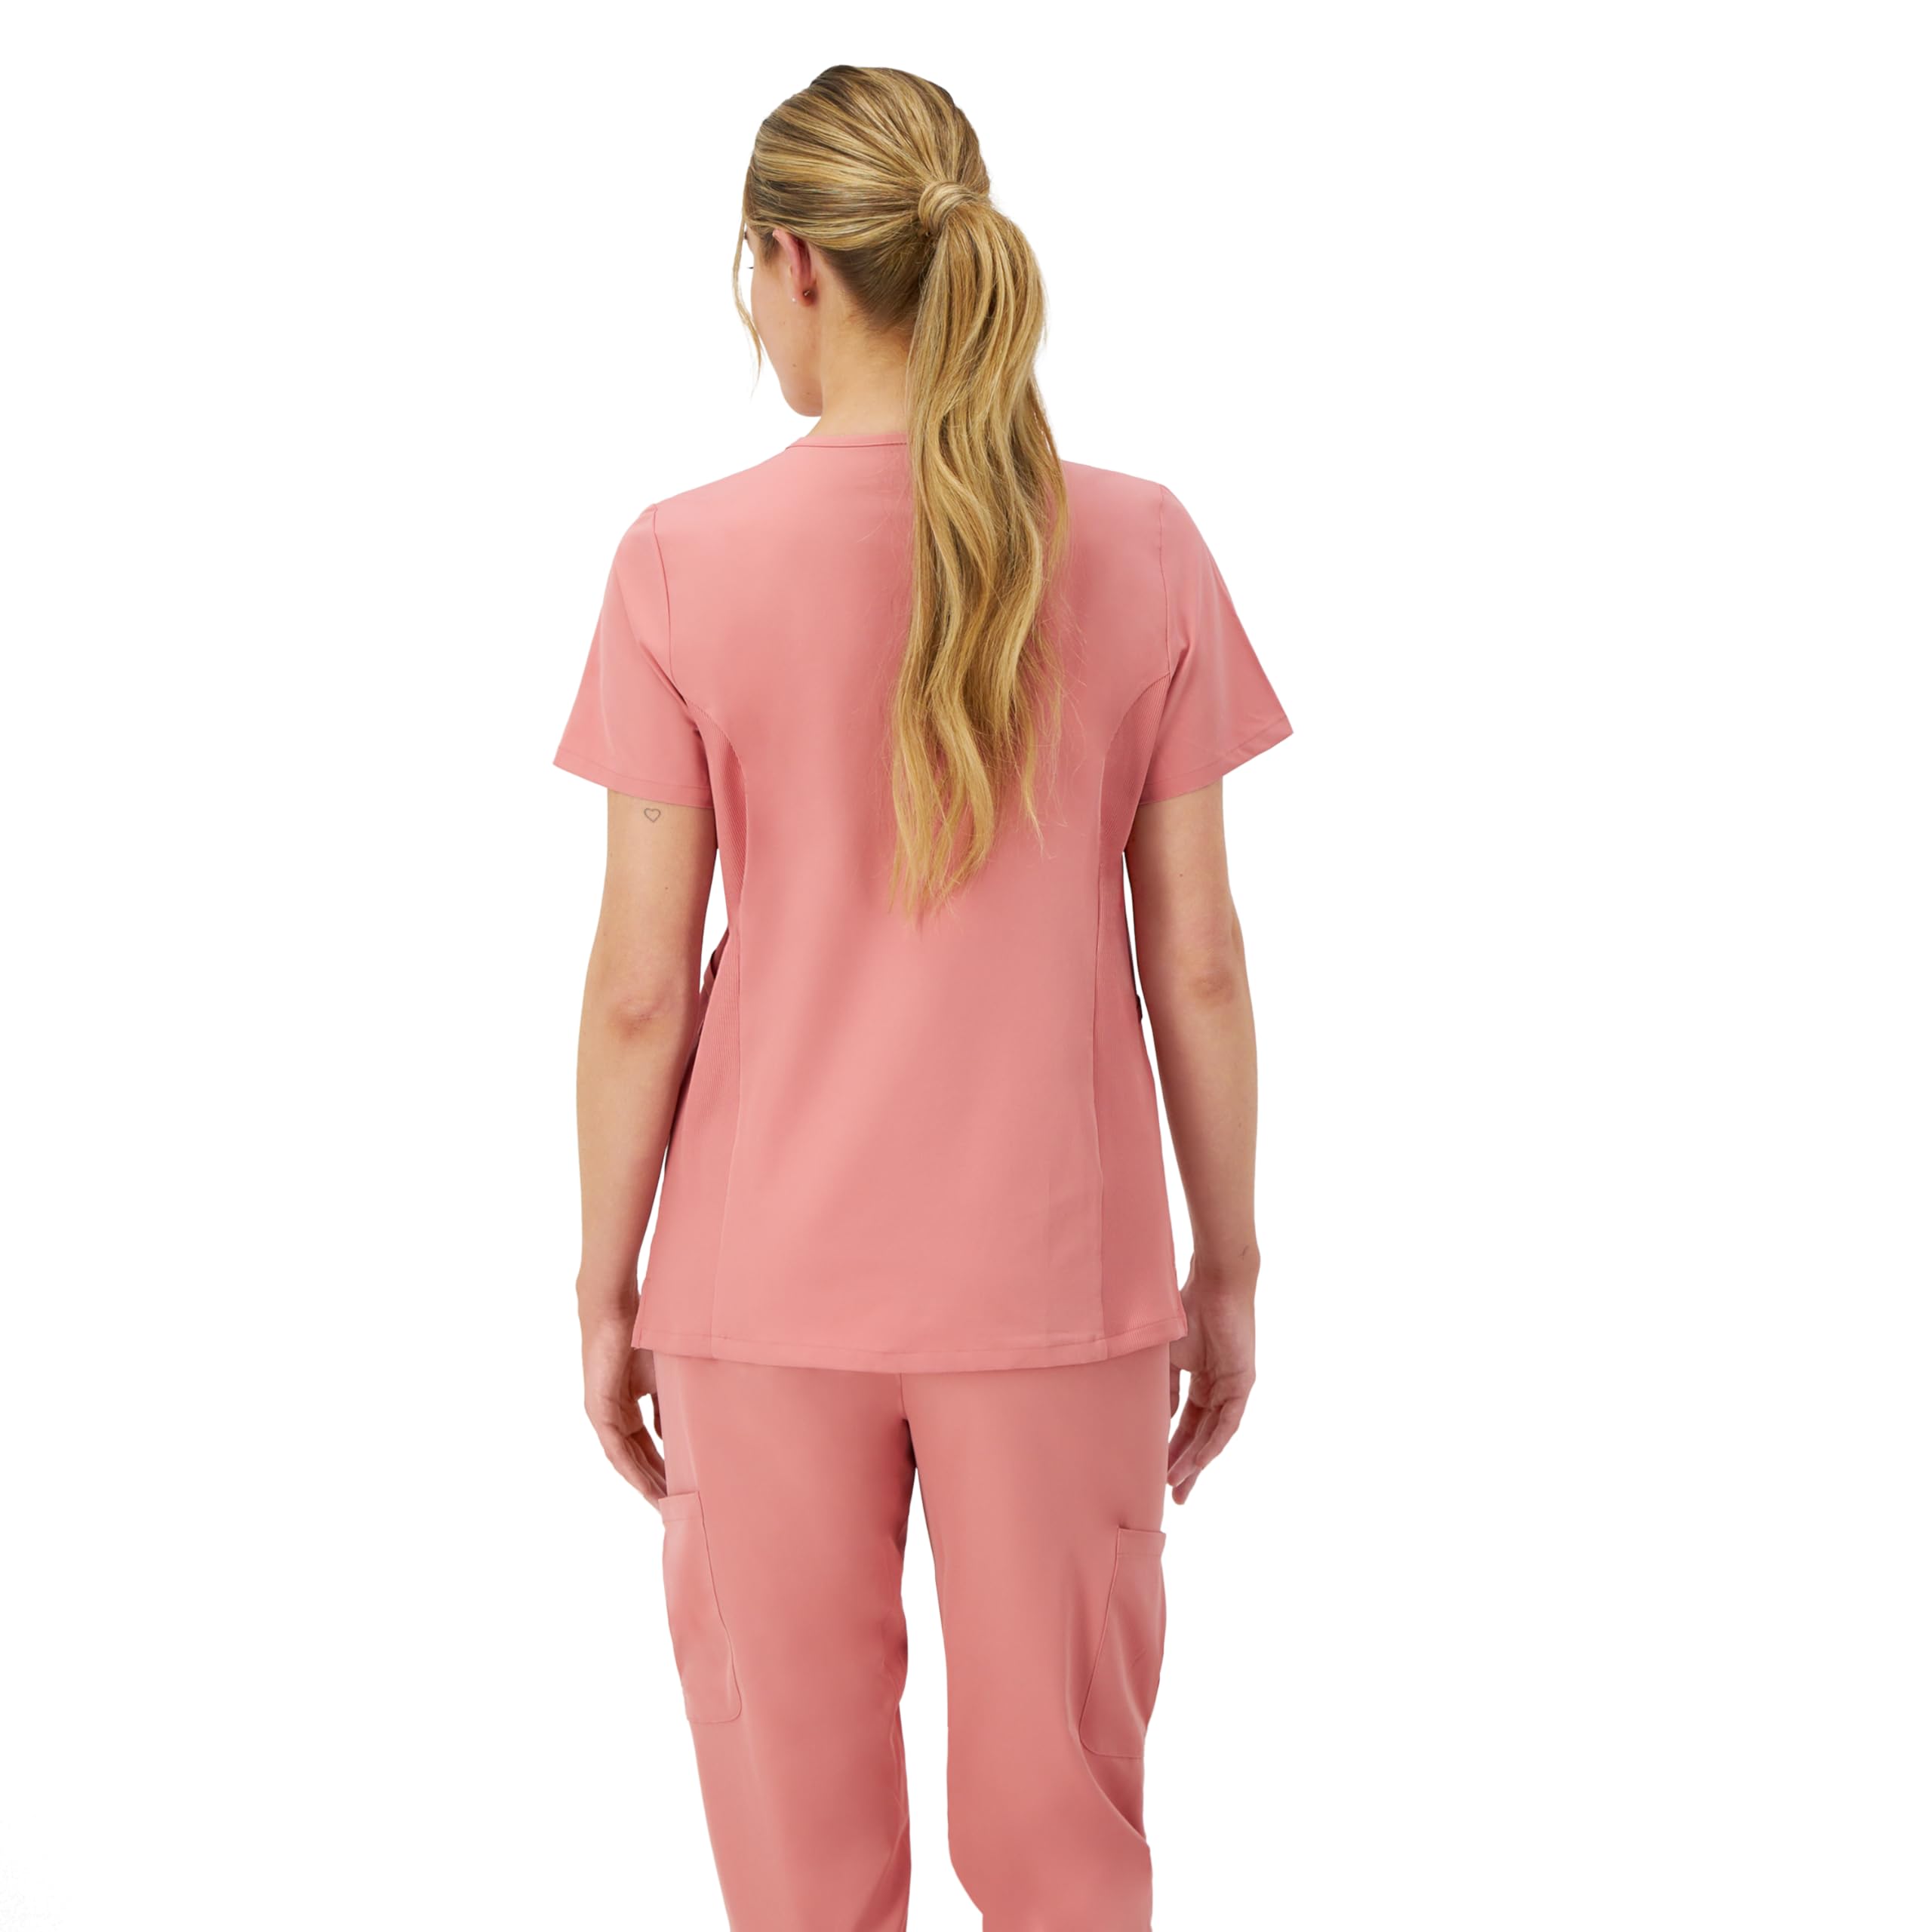 Hanes Women's Healthcare Top, Moisture-Wicking Stretch Scrub Shirts, Ribbed Side Panels